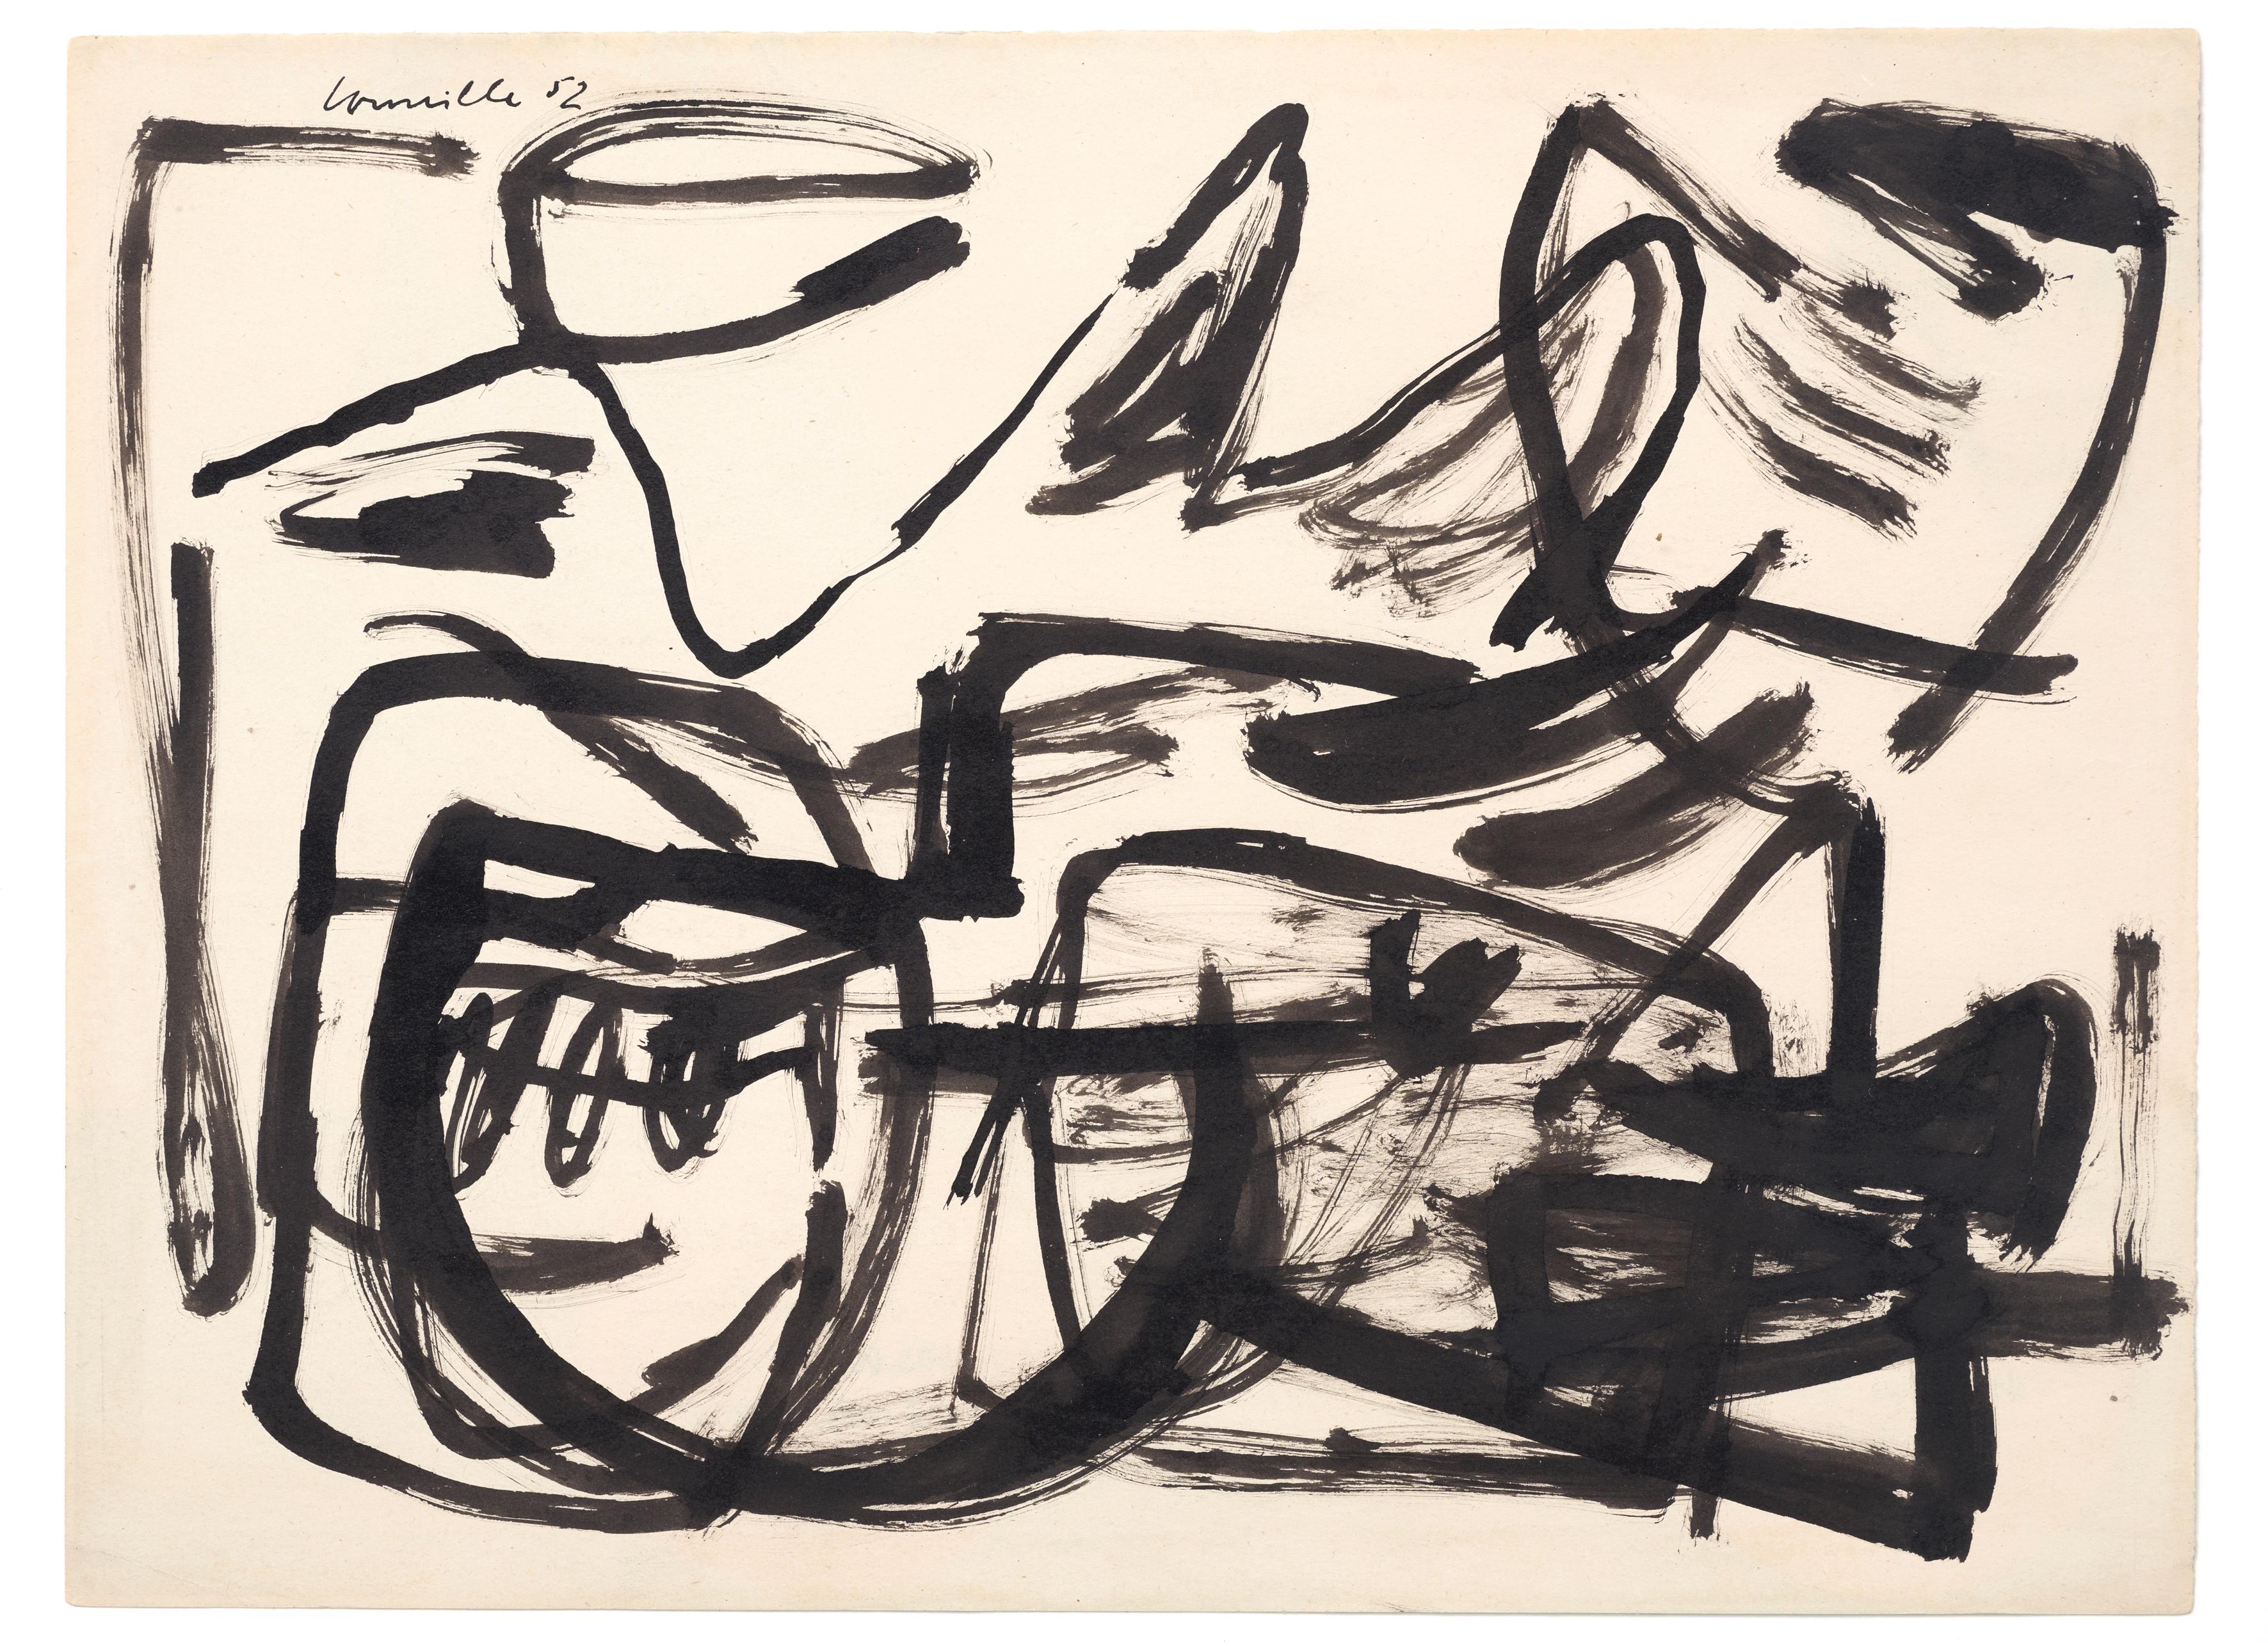 Guillaume Cornelis van Beverloo (Corneille) Abstract Drawing - Untitled, Corneille, 1952 (Expressionist Abstract Ink Painting)